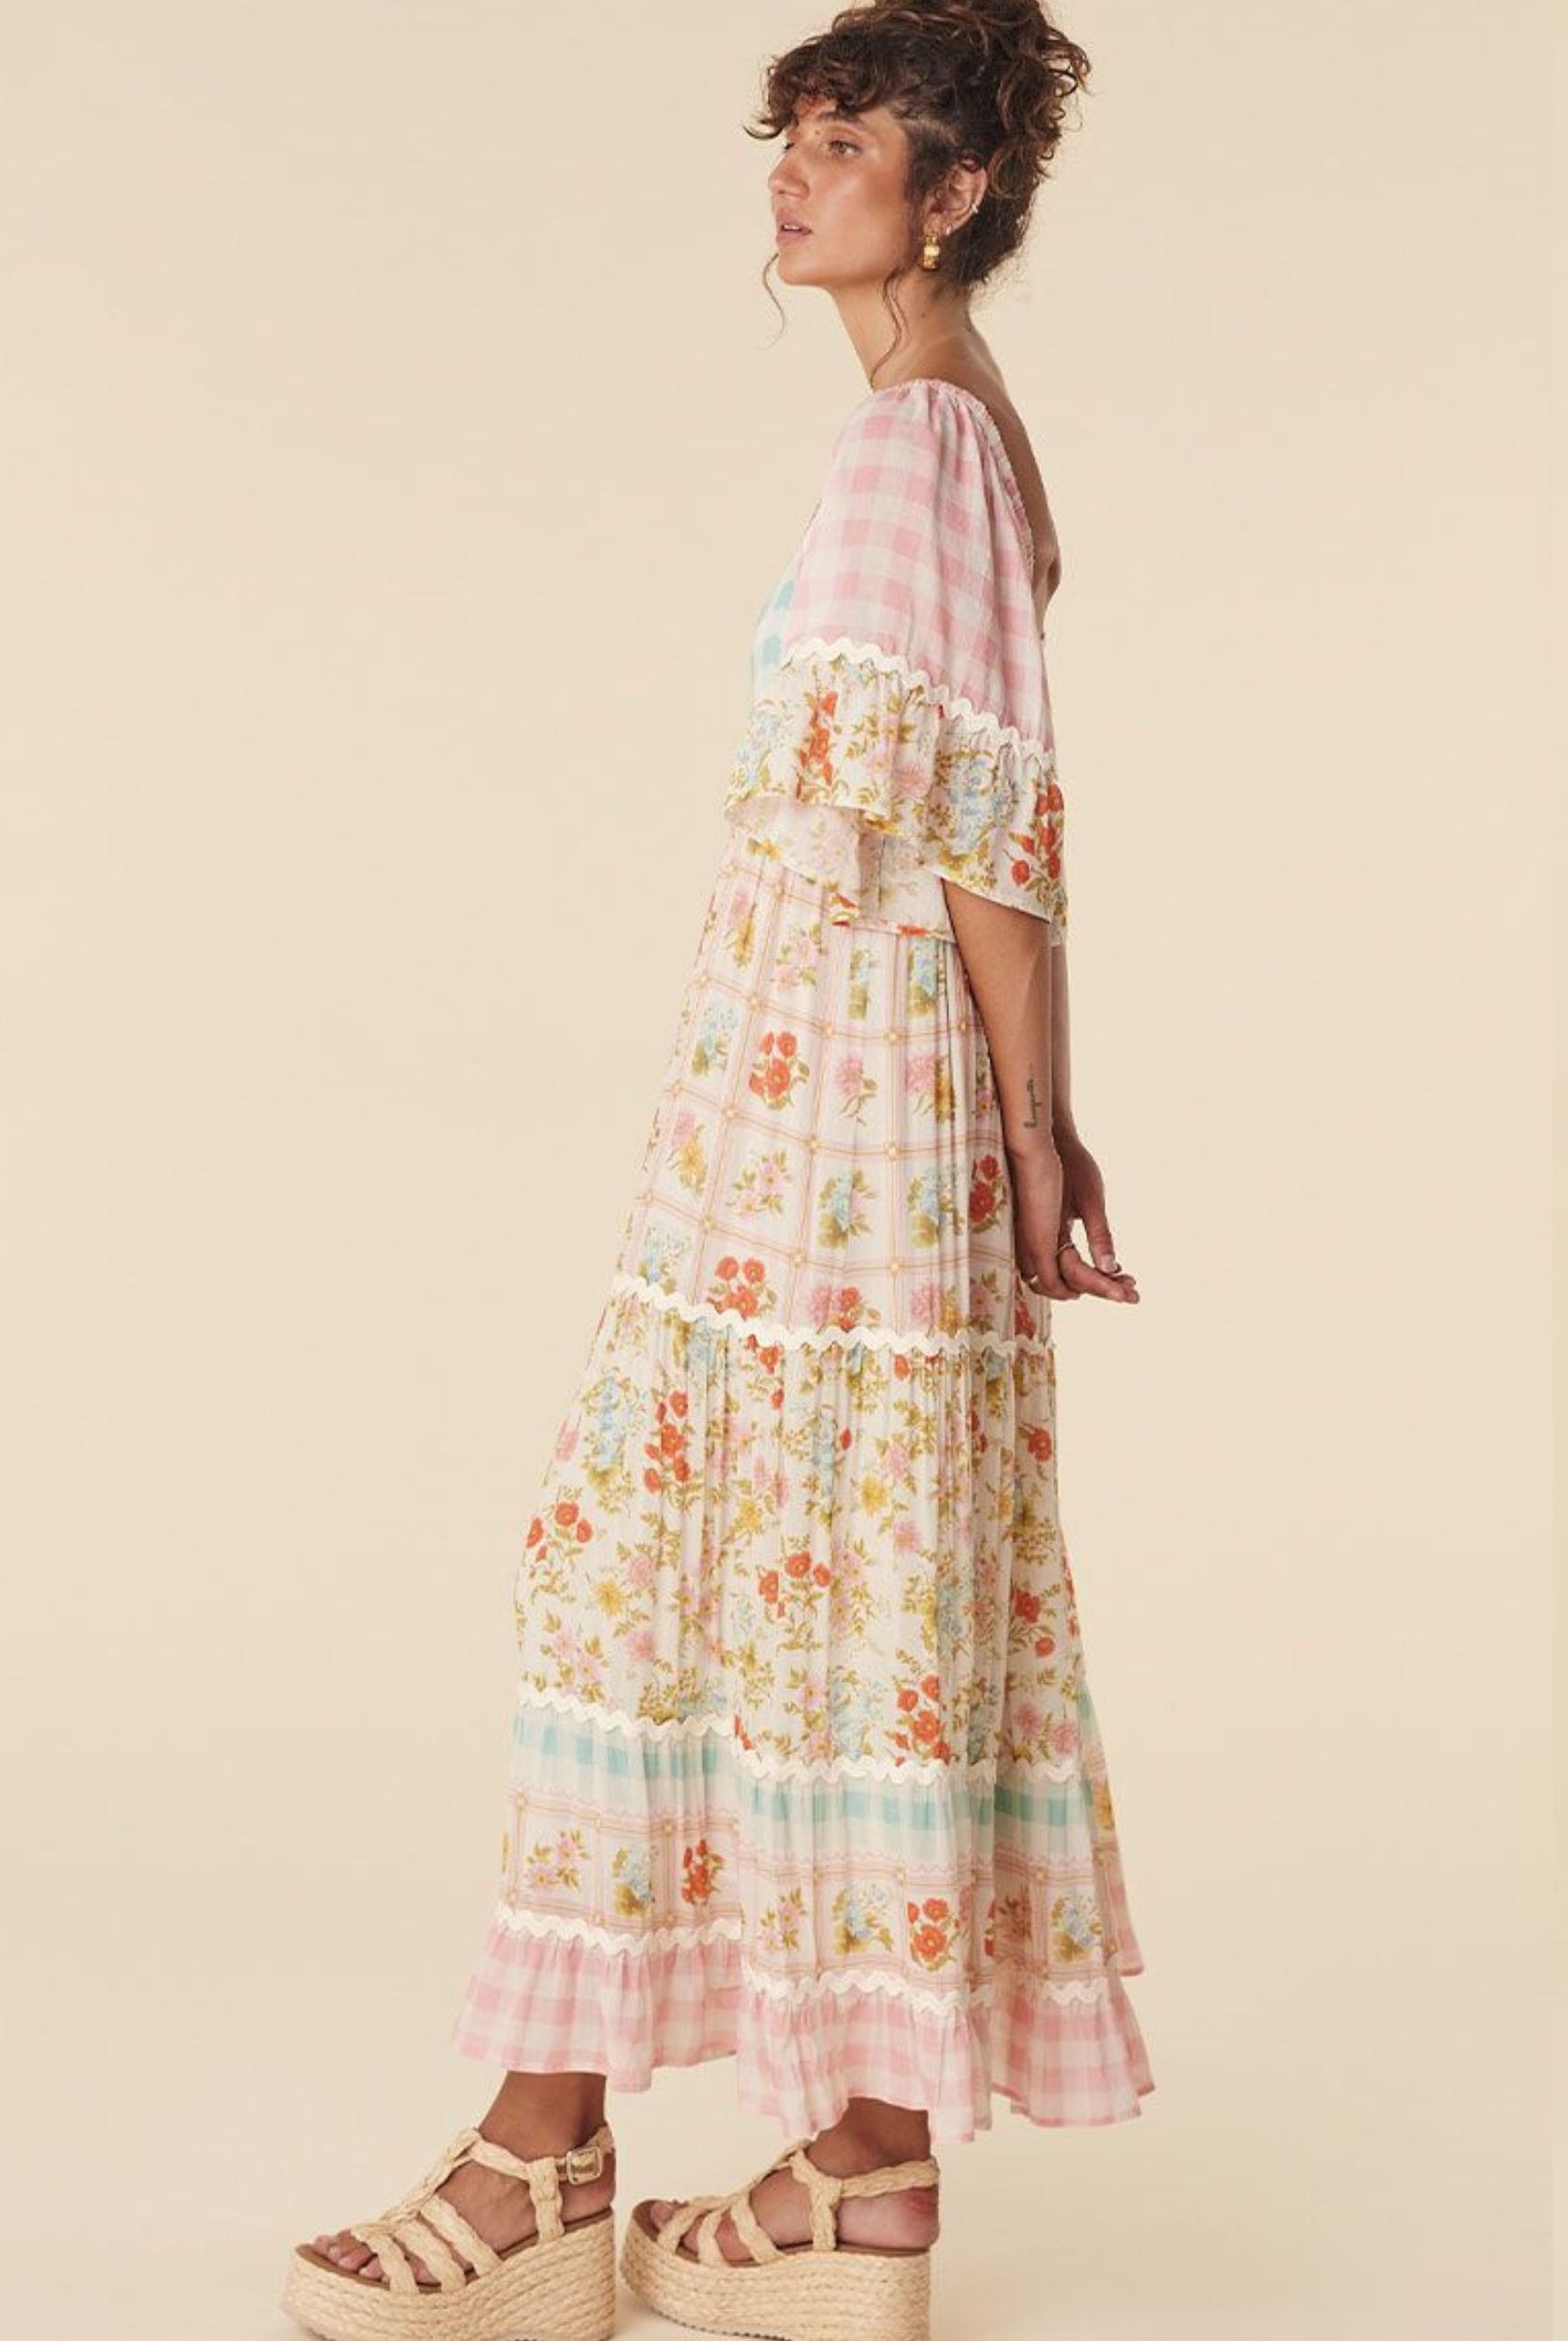 Model wearing the pastel flora gown from Spell